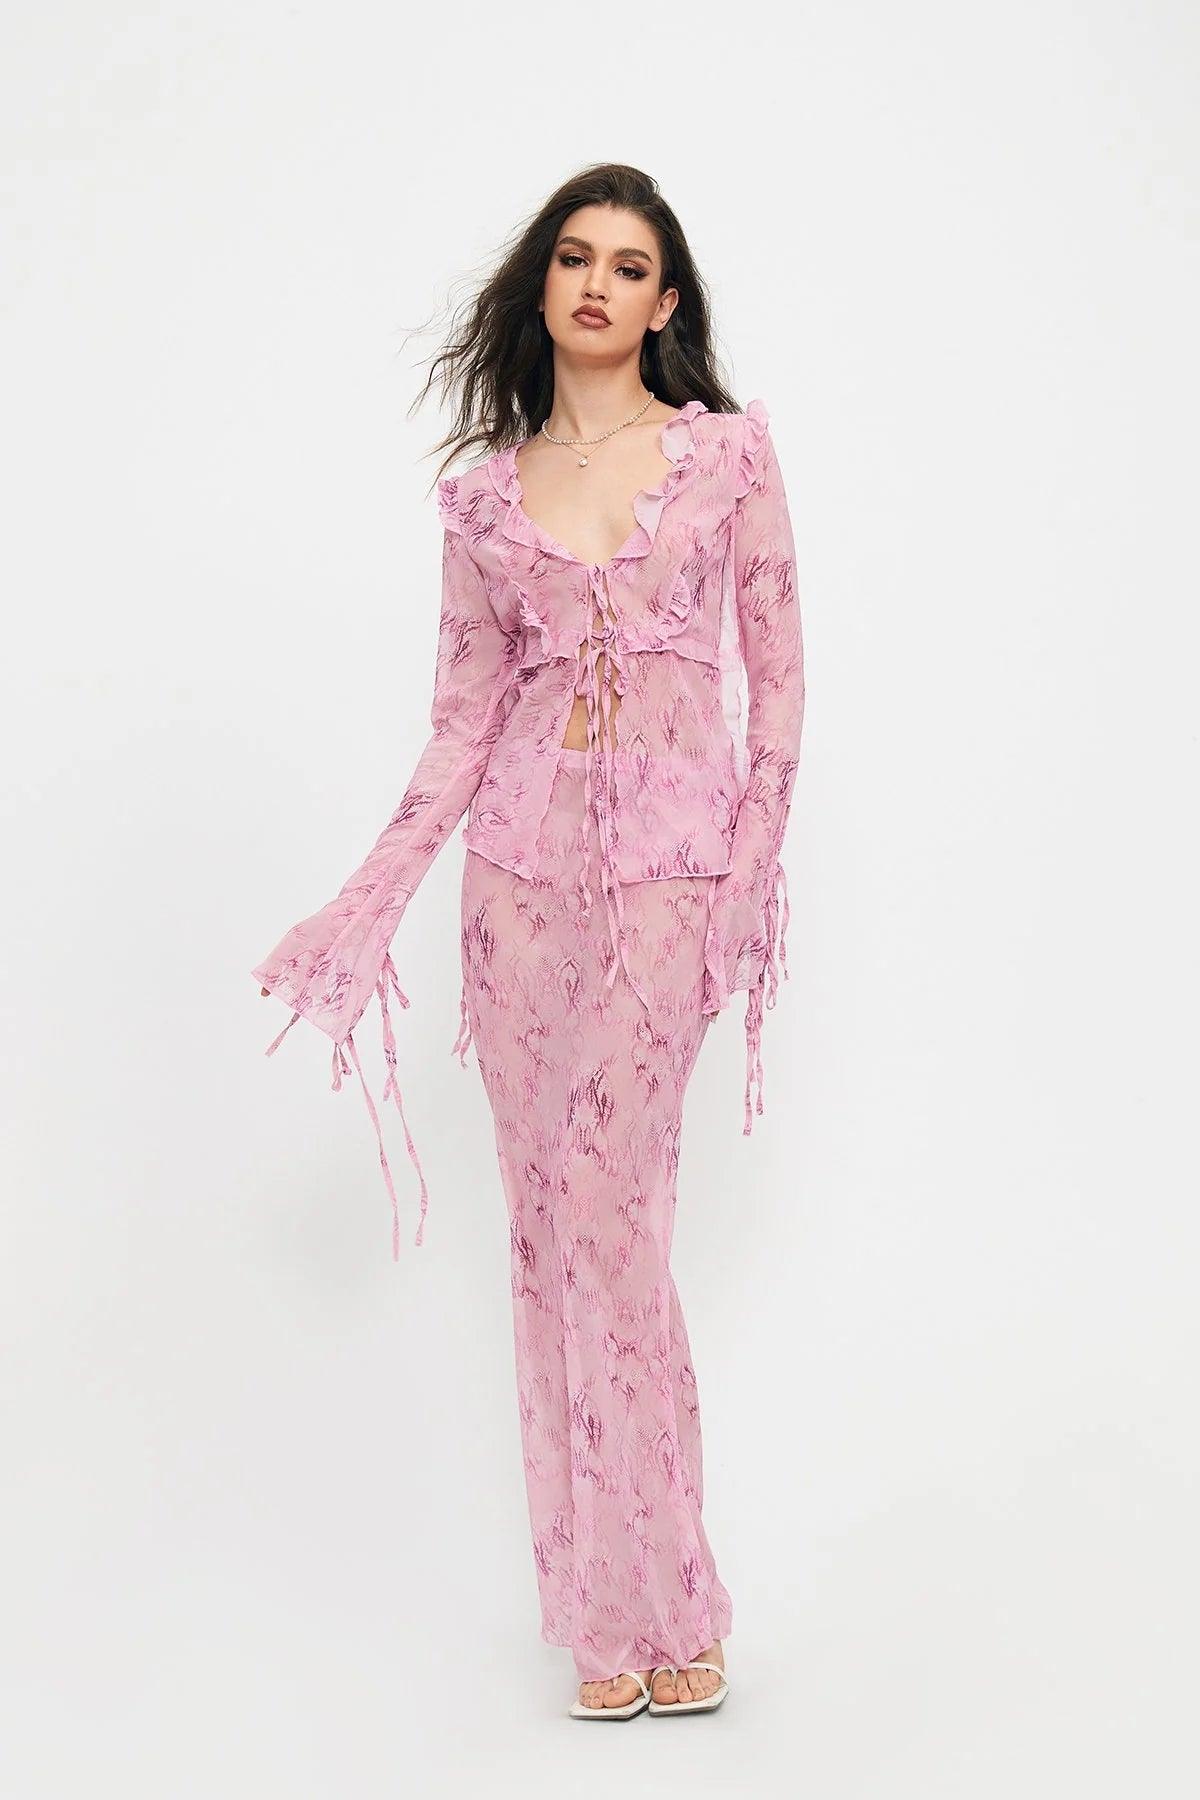 2023 New Ins Fashion Women's Strappy Lace V-neck Top Chiffon Printed Dress Suit - The Madinah Exchange 